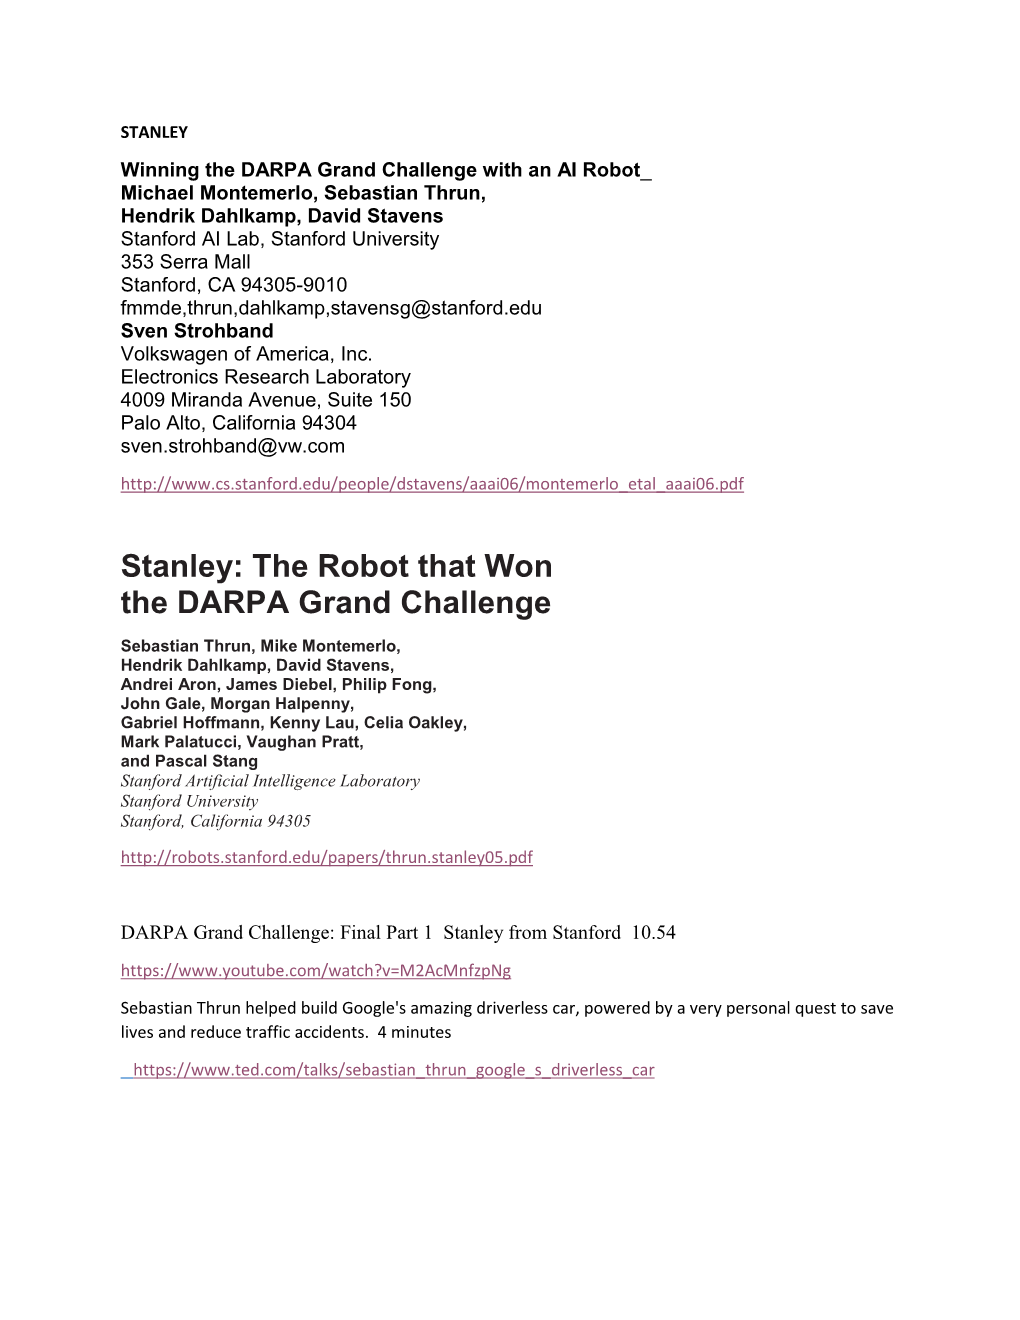 Stanley: the Robot That Won the DARPA Grand Challenge